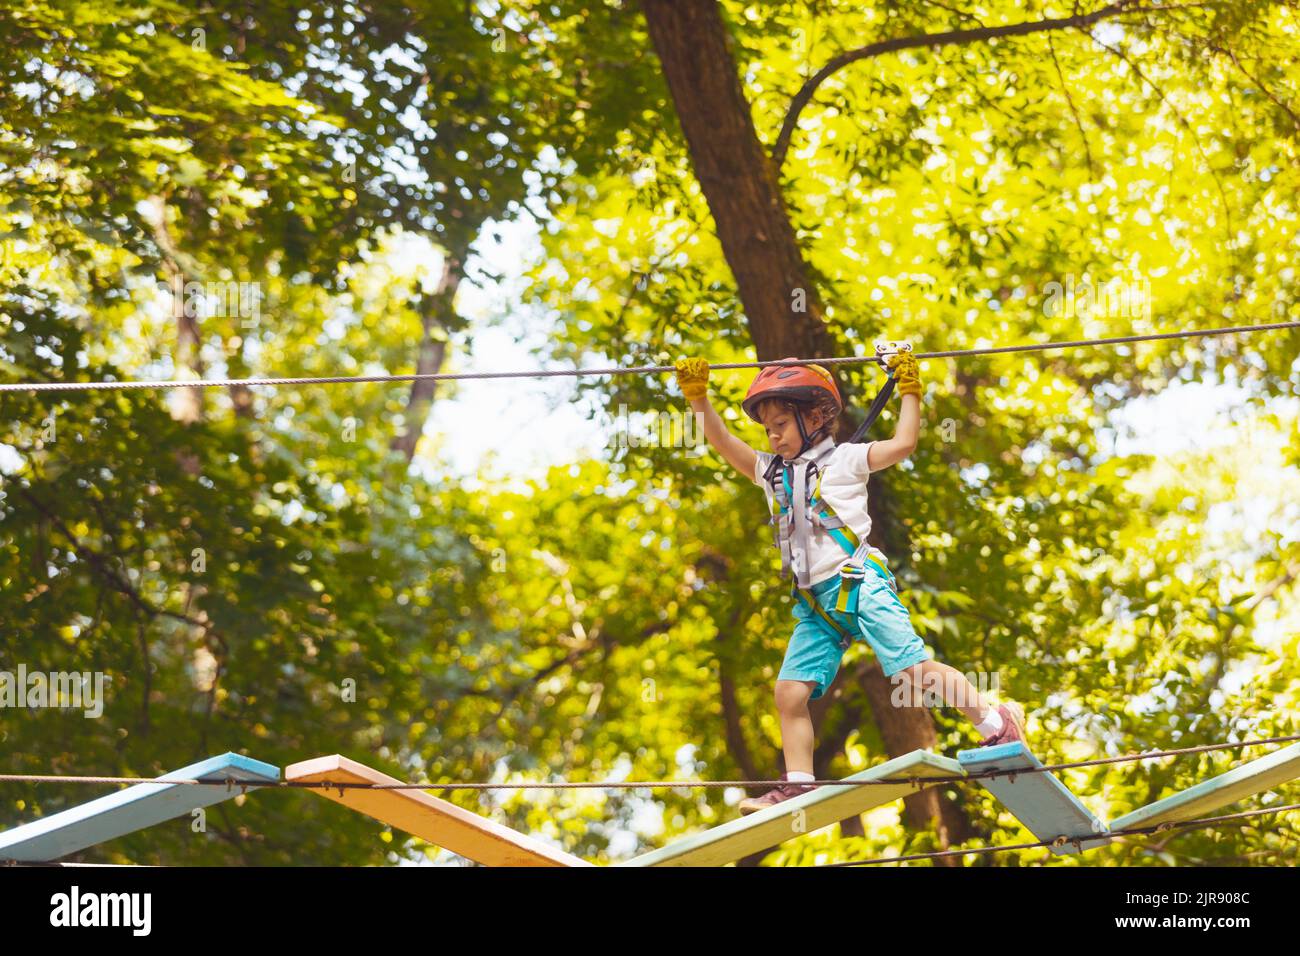 Portrait of a concentrated boy who is climbing in the rope park in summer. He is wearing a protective helmet and gloves Stock Photo